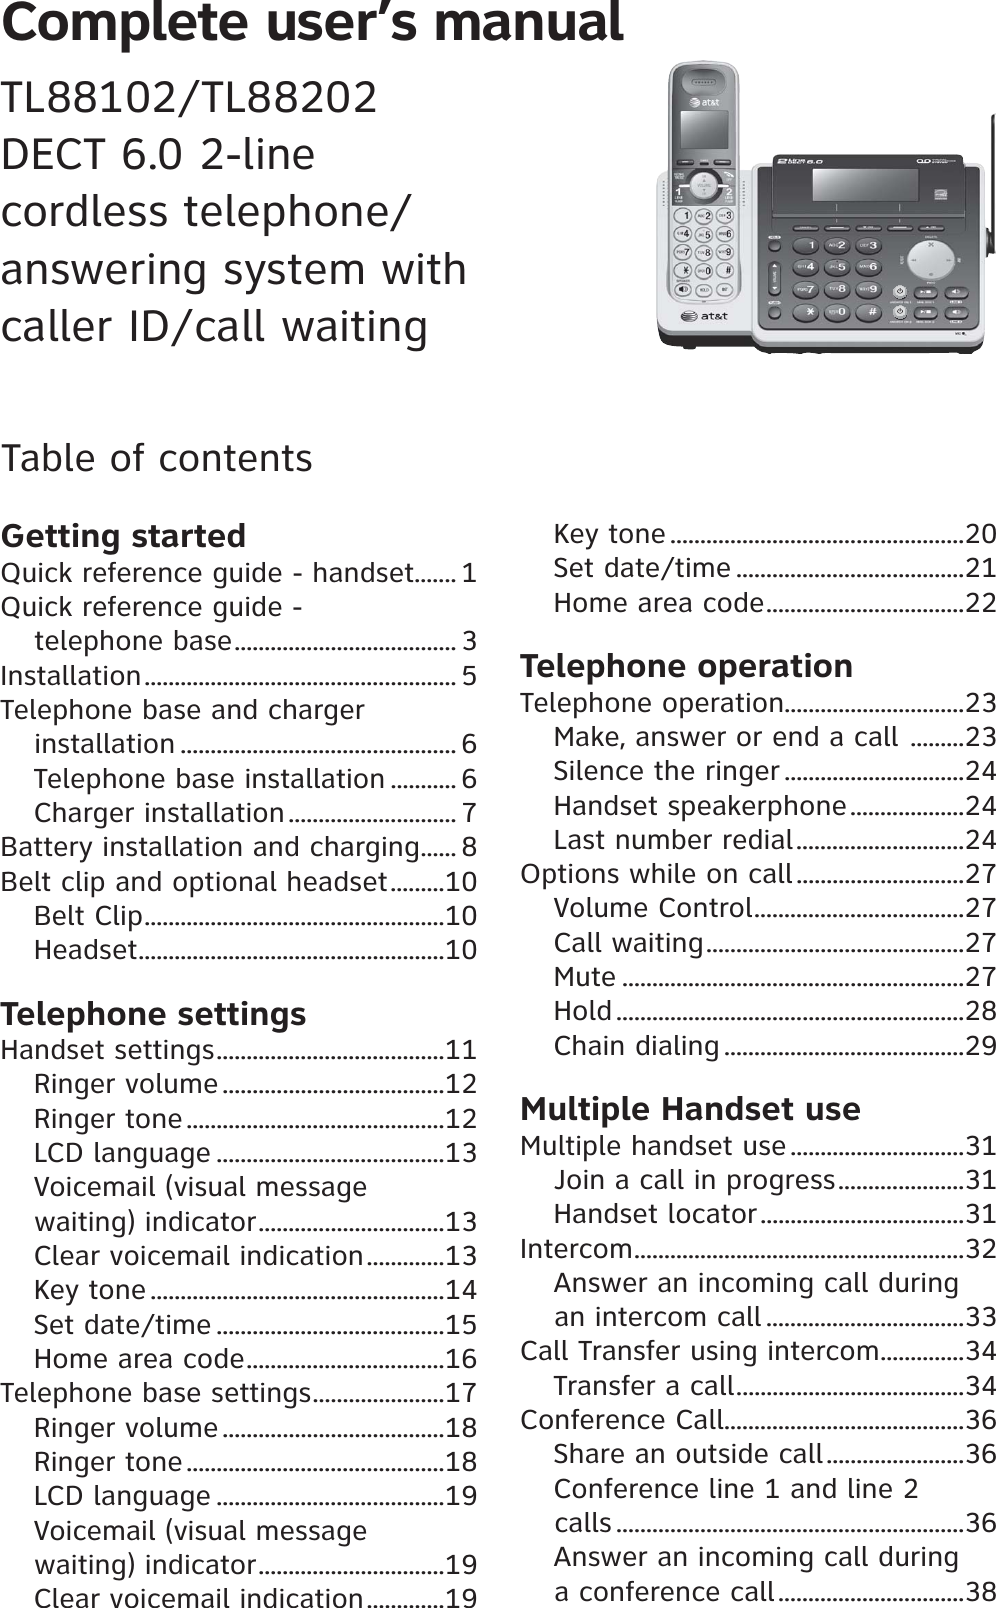 Complete user’s manual TL88102/TL88202DECT 6.0 2-line cordless telephone/answering system withcaller ID/call waitingTable of contentsGetting startedQuick reference guide - handset....... 1Quick reference guide - telephone base..................................... 3Installation.................................................... 5Telephone base and charger installation .............................................. 6Telephone base installation ........... 6Charger installation ............................ 7Battery installation and charging...... 8Belt clip and optional headset.........10Belt Clip..................................................10Headset...................................................10Telephone settingsHandset settings......................................11Ringer volume .....................................12Ringer tone...........................................12LCD language ......................................13Voicemail (visual message waiting) indicator...............................13Clear voicemail indication.............13Key tone .................................................14Set date/time ......................................15Home area code.................................16Telephone base settings......................17Ringer volume .....................................18Ringer tone...........................................18LCD language ......................................19Voicemail (visual message waiting) indicator...............................19Clear voicemail indication.............19Key tone .................................................20Set date/time ......................................21Home area code.................................22Telephone operationTelephone operation..............................23Make, answer or end a call .........23Silence the ringer ..............................24Handset speakerphone...................24Last number redial............................24Options while on call............................27Volume Control...................................27Call waiting...........................................27Mute .........................................................27Hold ..........................................................28Chain dialing ........................................29Multiple Handset useMultiple handset use.............................31Join a call in progress.....................31Handset locator..................................31Intercom.......................................................32Answer an incoming call during an intercom call .................................33Call Transfer using intercom..............34Transfer a call......................................34Conference Call........................................36Share an outside call.......................36Conference line 1 and line 2 calls ..........................................................36Answer an incoming call during a conference call...............................38